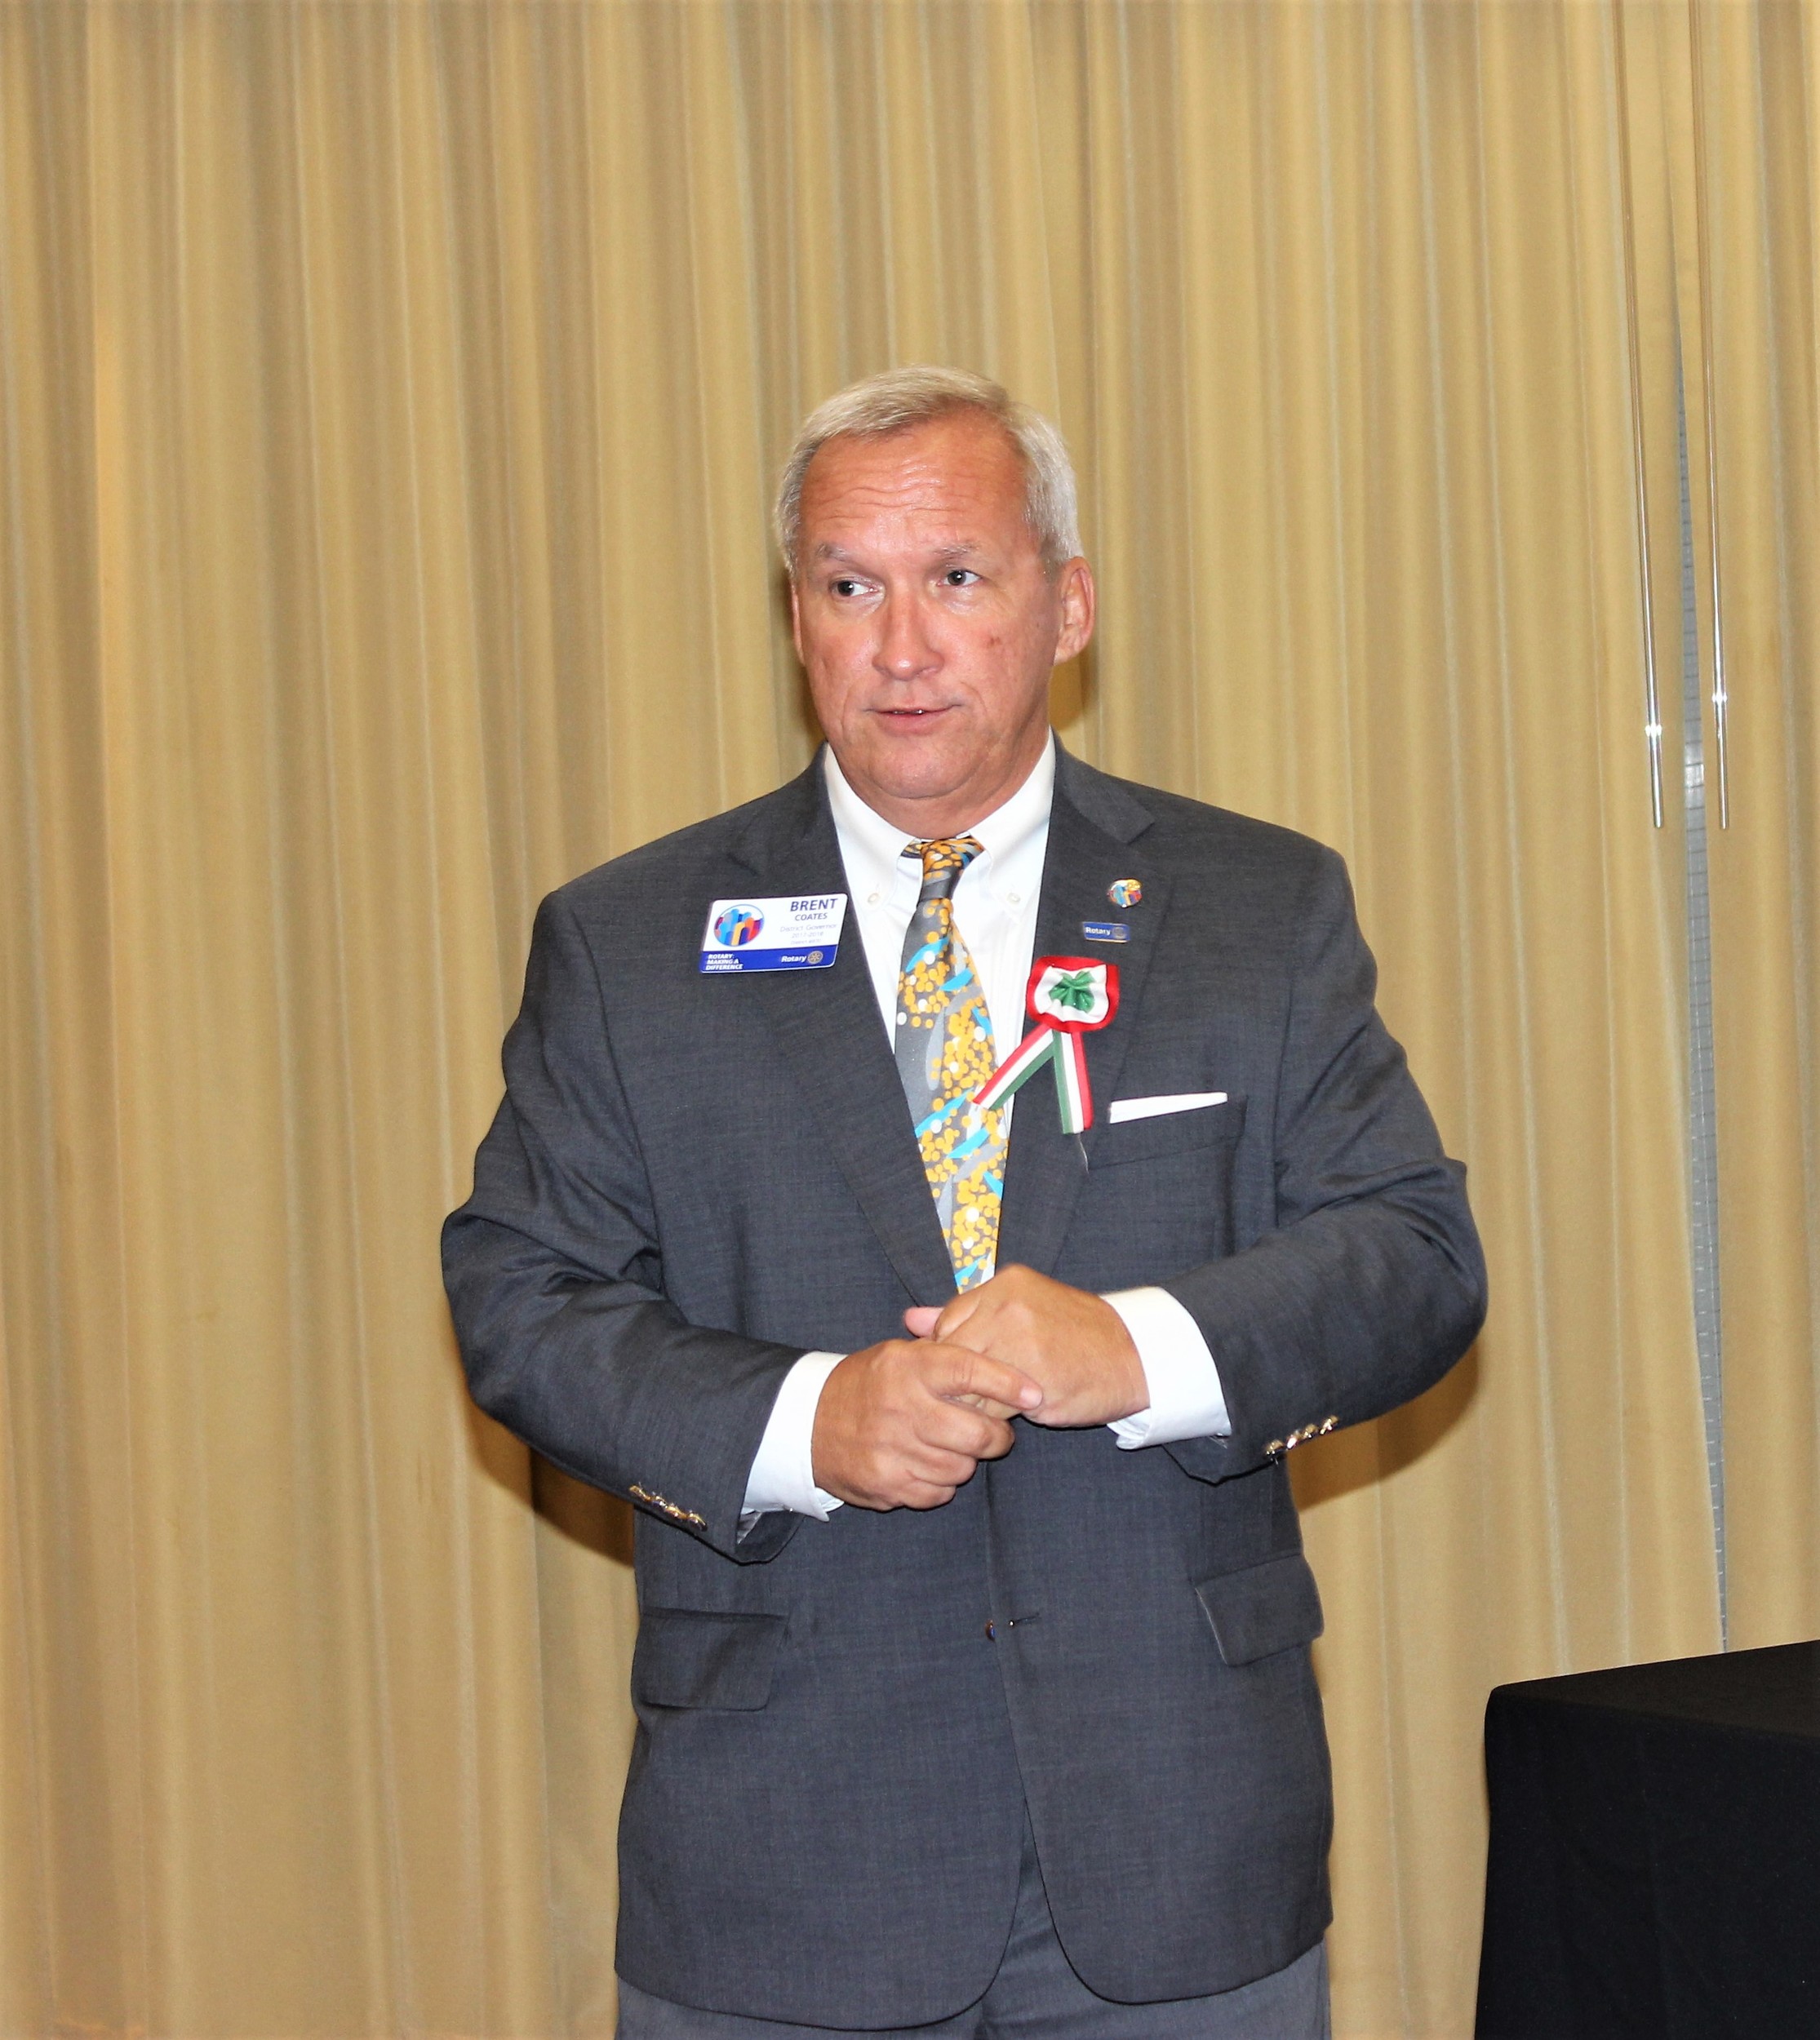 New Rotary District Governor Brent Coates